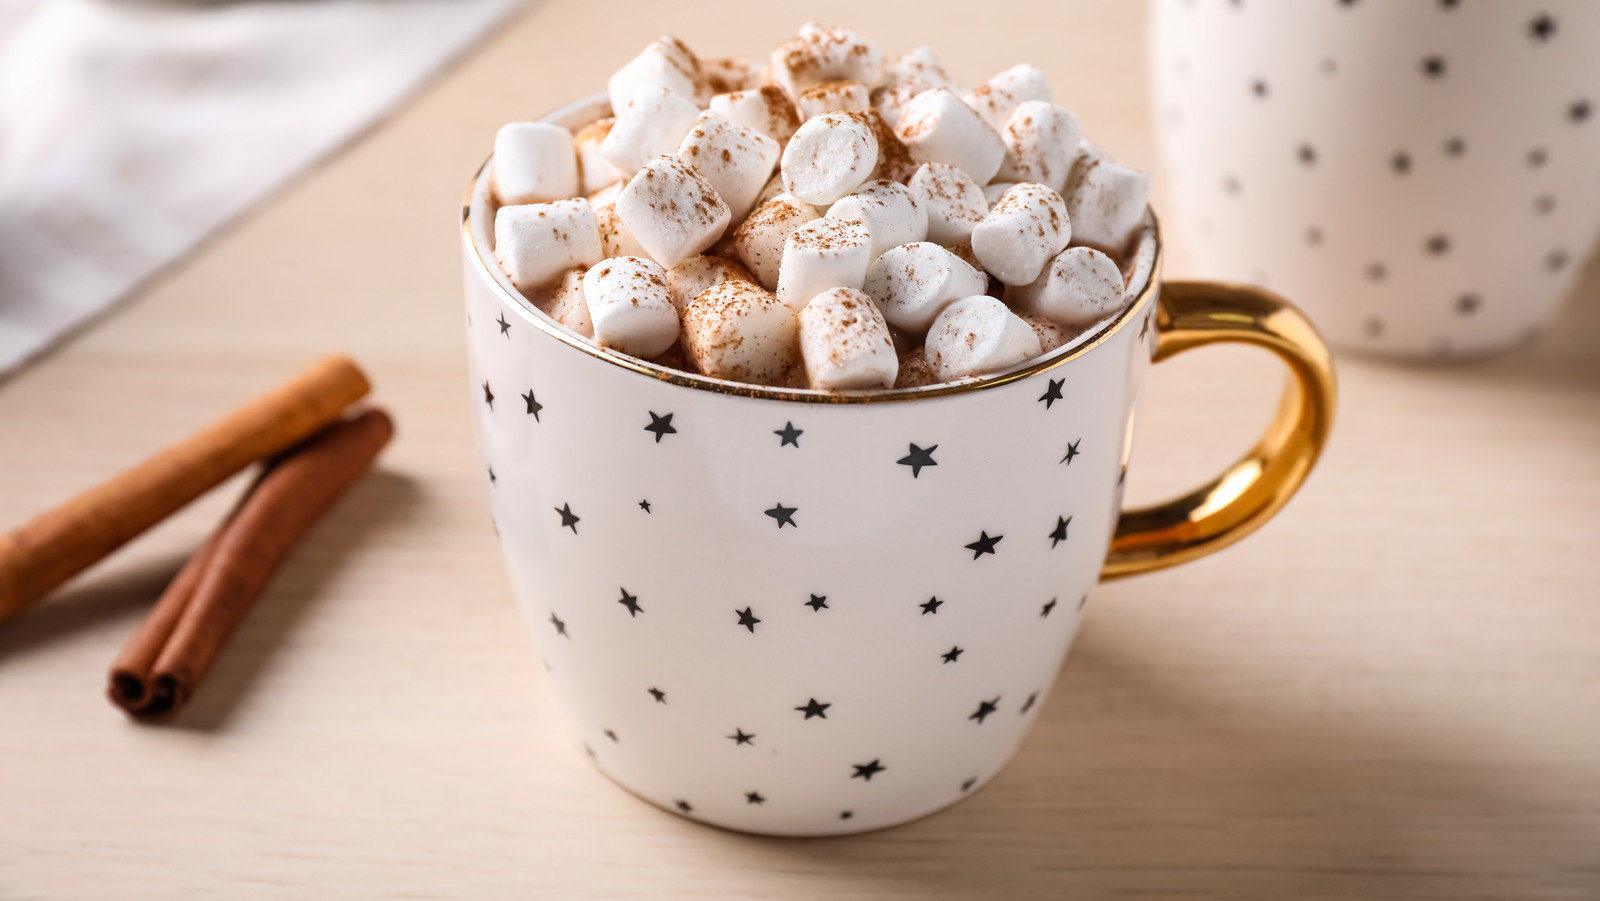 https://www.mashed.com/img/gallery/how-people-around-the-world-drink-hot-chocolate/l-intro-1664316090.jpg